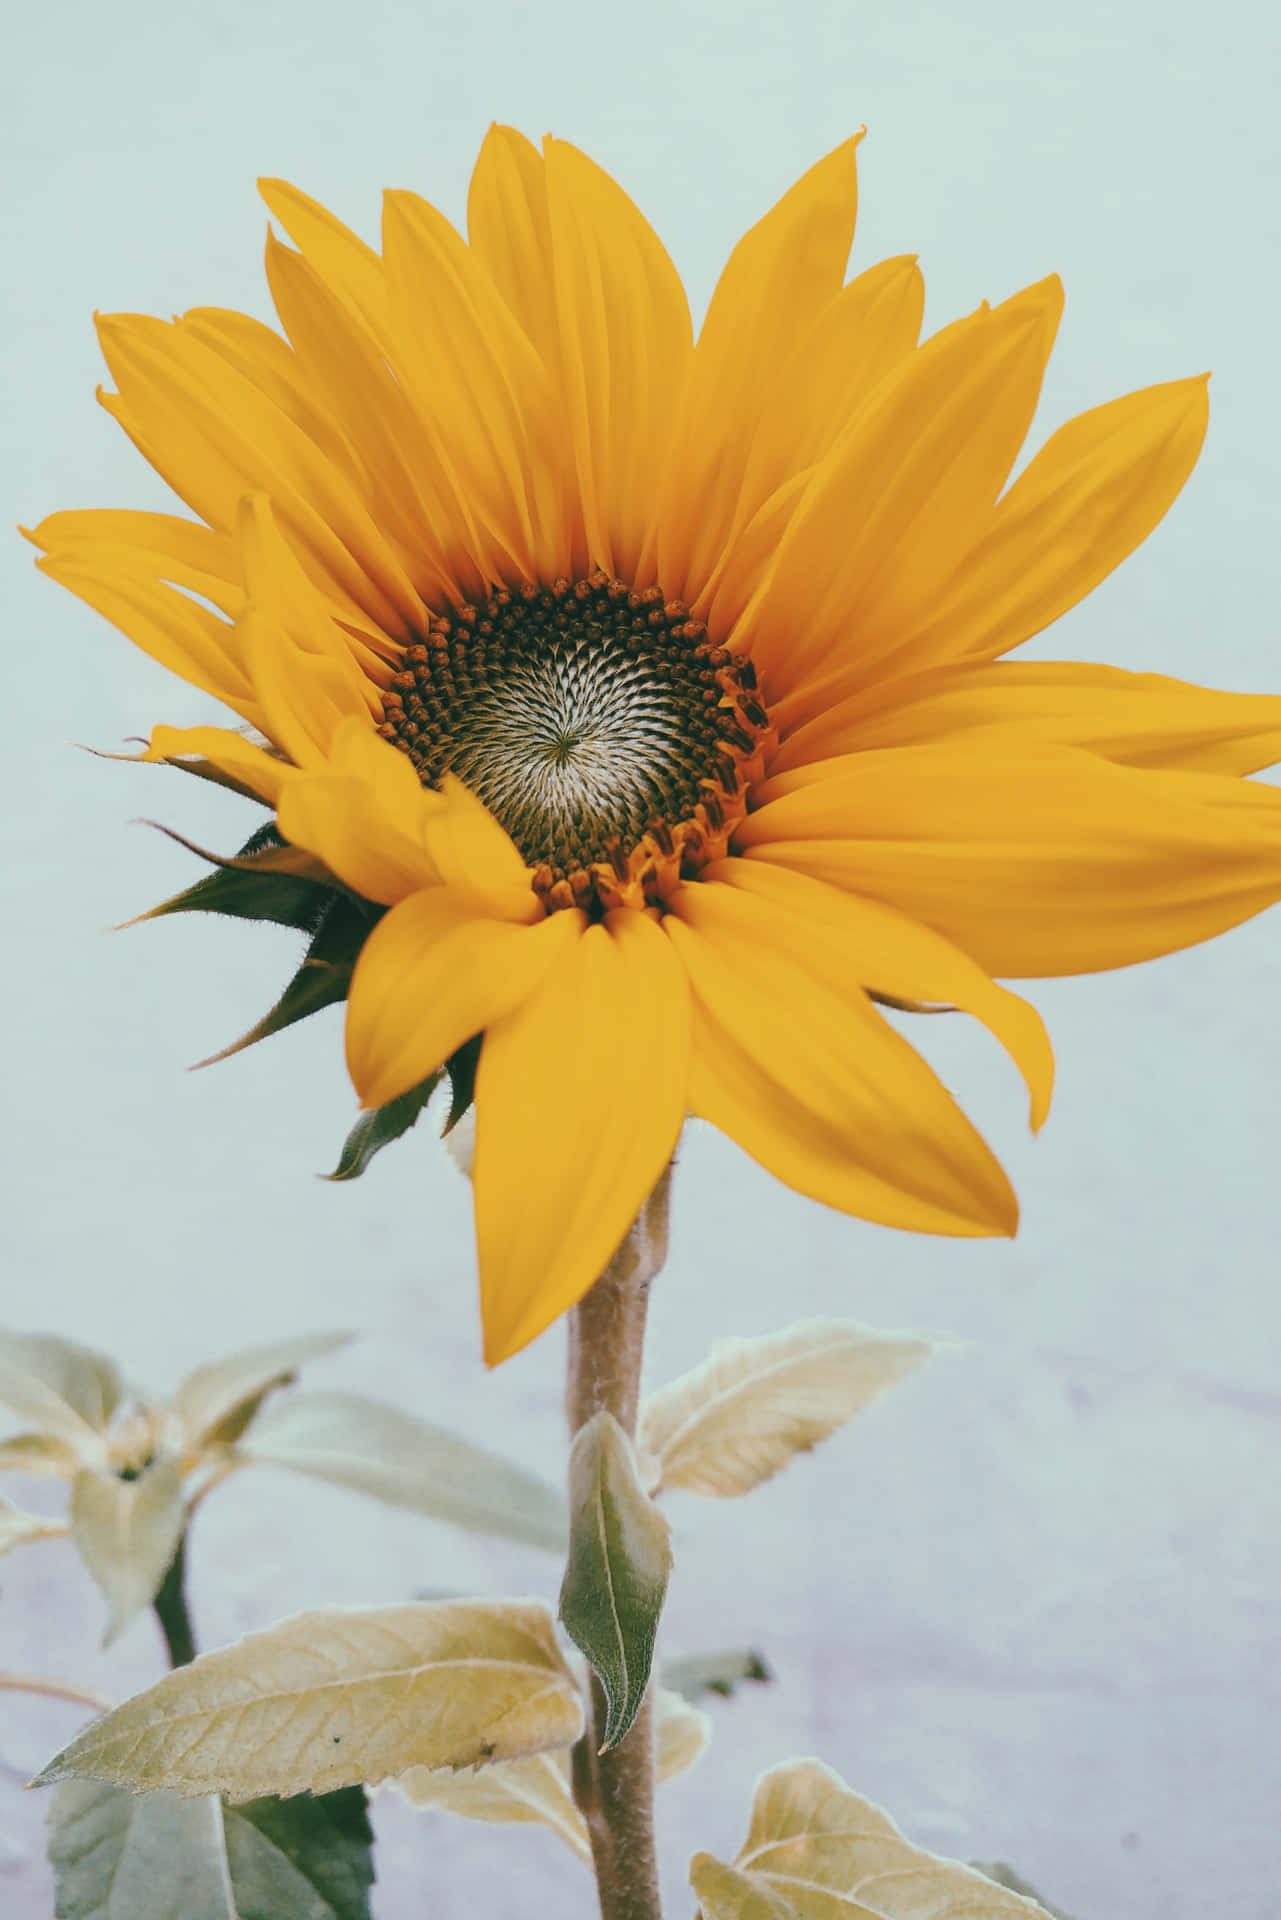 A Yellow Sunflower In A Vase